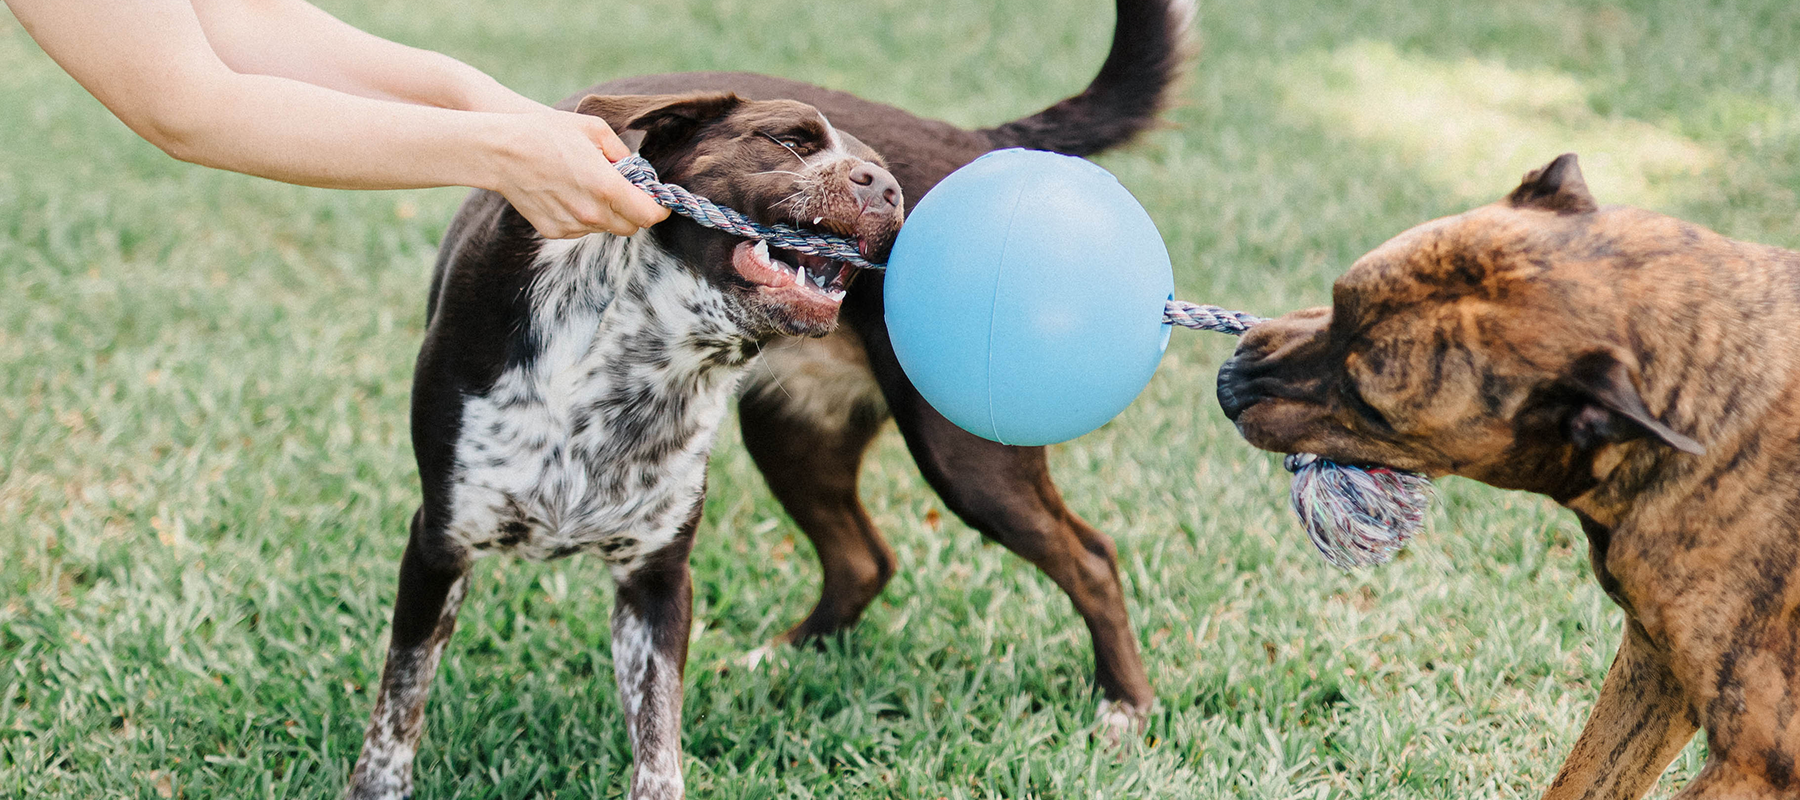 From chasing to chewing: interactive puppy toys to keep them